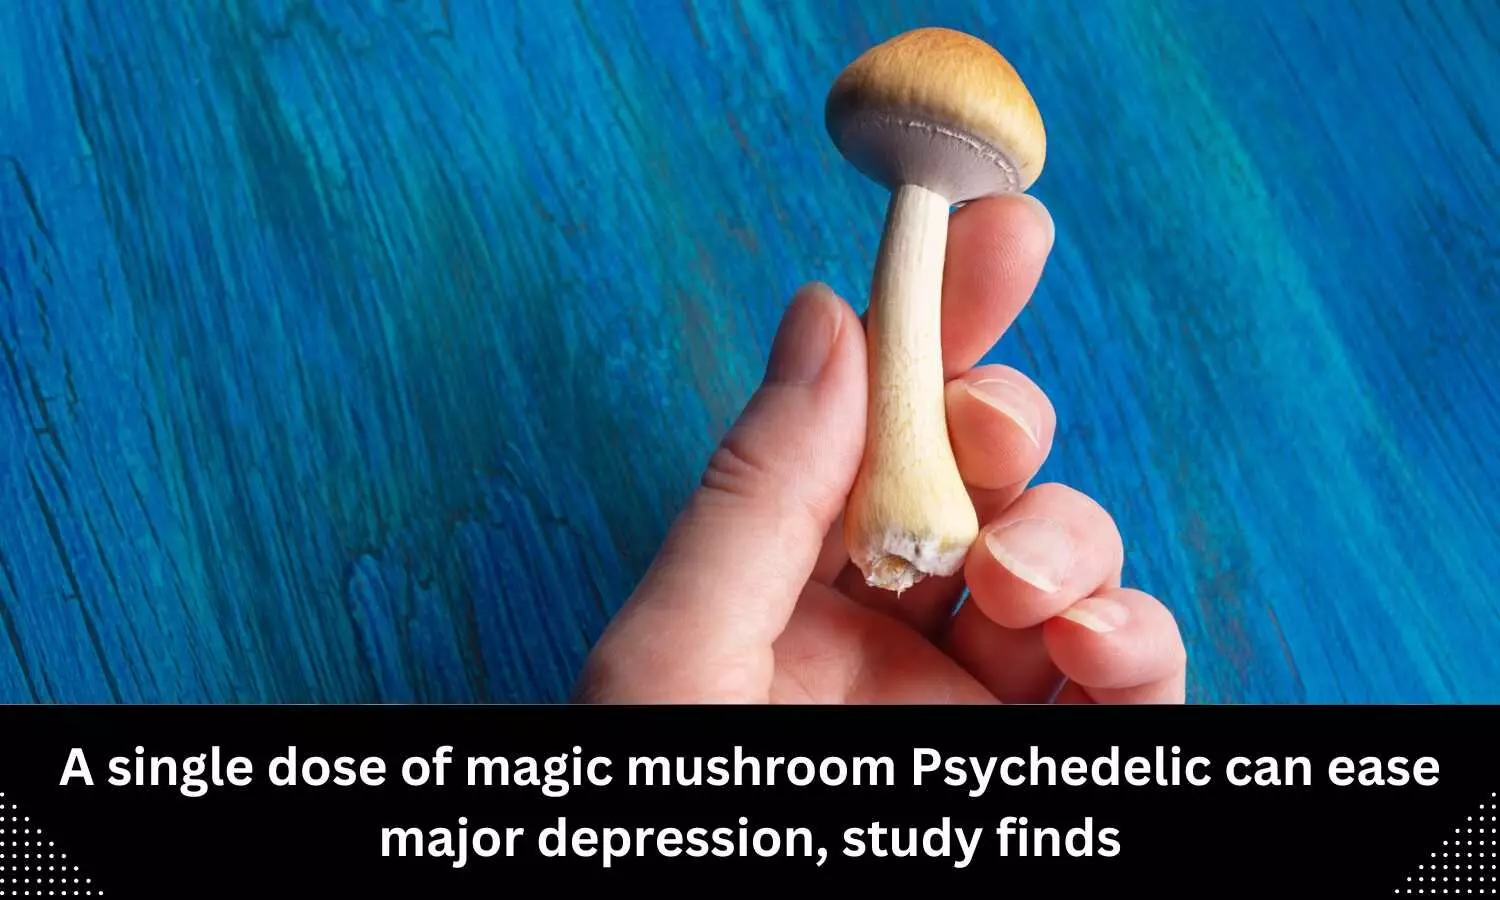 A single dose of magic mushroom Psychedelic can ease major depression: Study